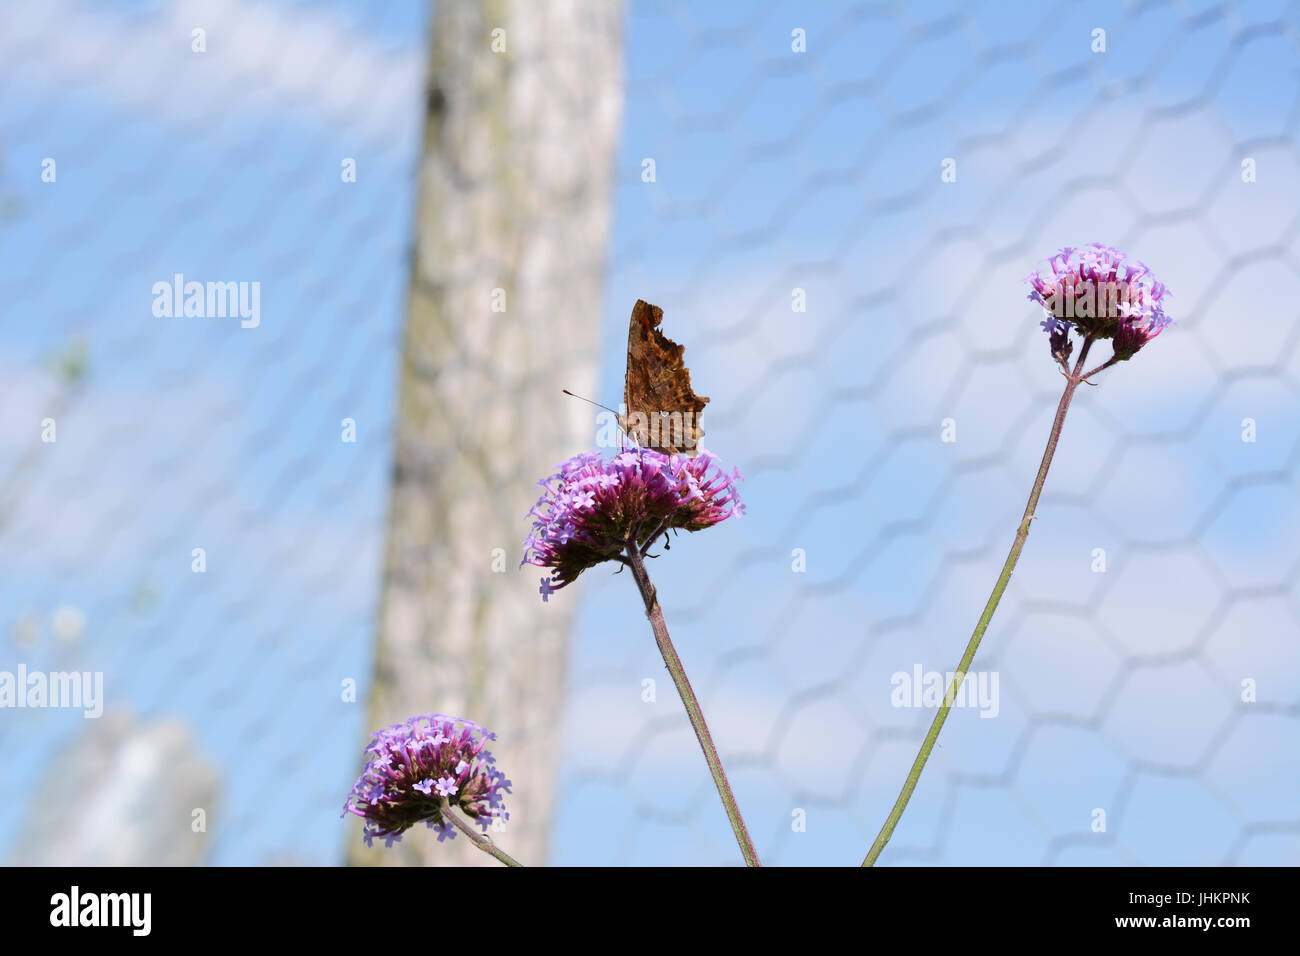 Comma butterfly stands with closed wings on a long-stemmed verbena flower against blue sky Stock Photo